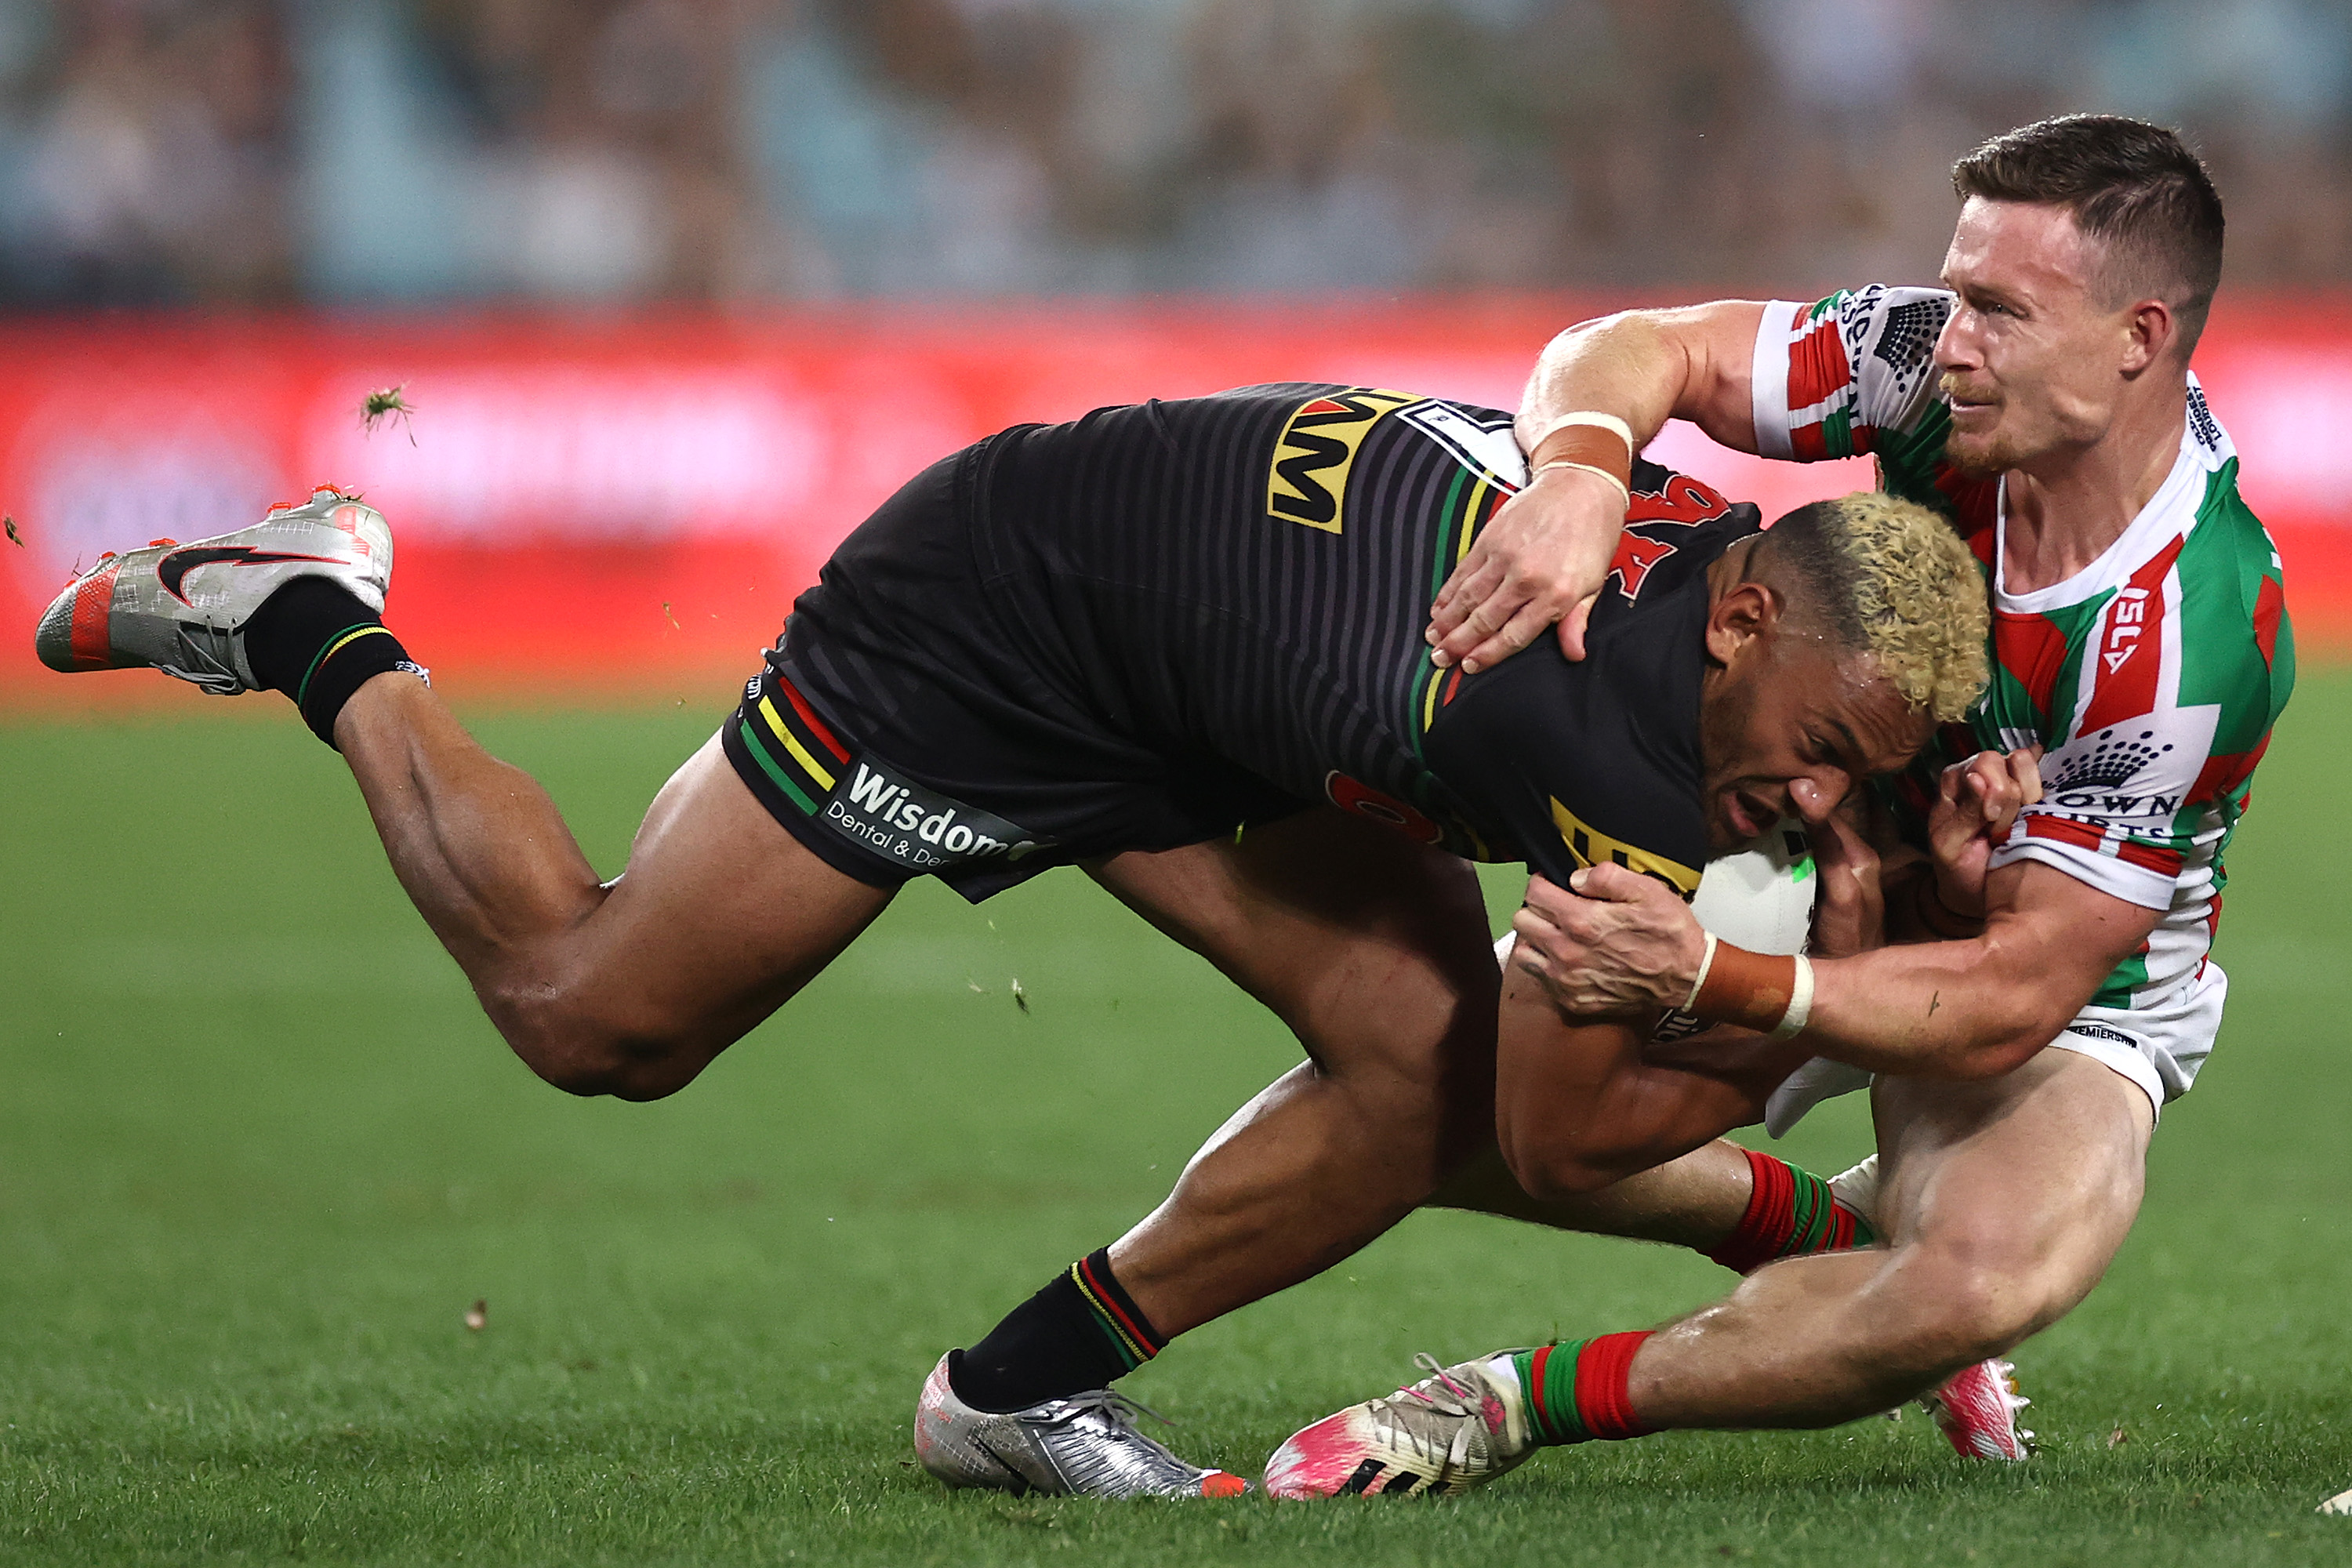 SYDNEY, AUSTRALIA - OCTOBER 17:  Apisai Koroisau of the Panthers is tackled by Damien Cook of the Rabbitohs during the NRL Preliminary Final match between the Penrith Panthers and the South Sydney Rabbitohs at ANZ Stadium on October 17, 2020 in Sydney, Australia. (Photo by Cameron Spencer/Getty Images)